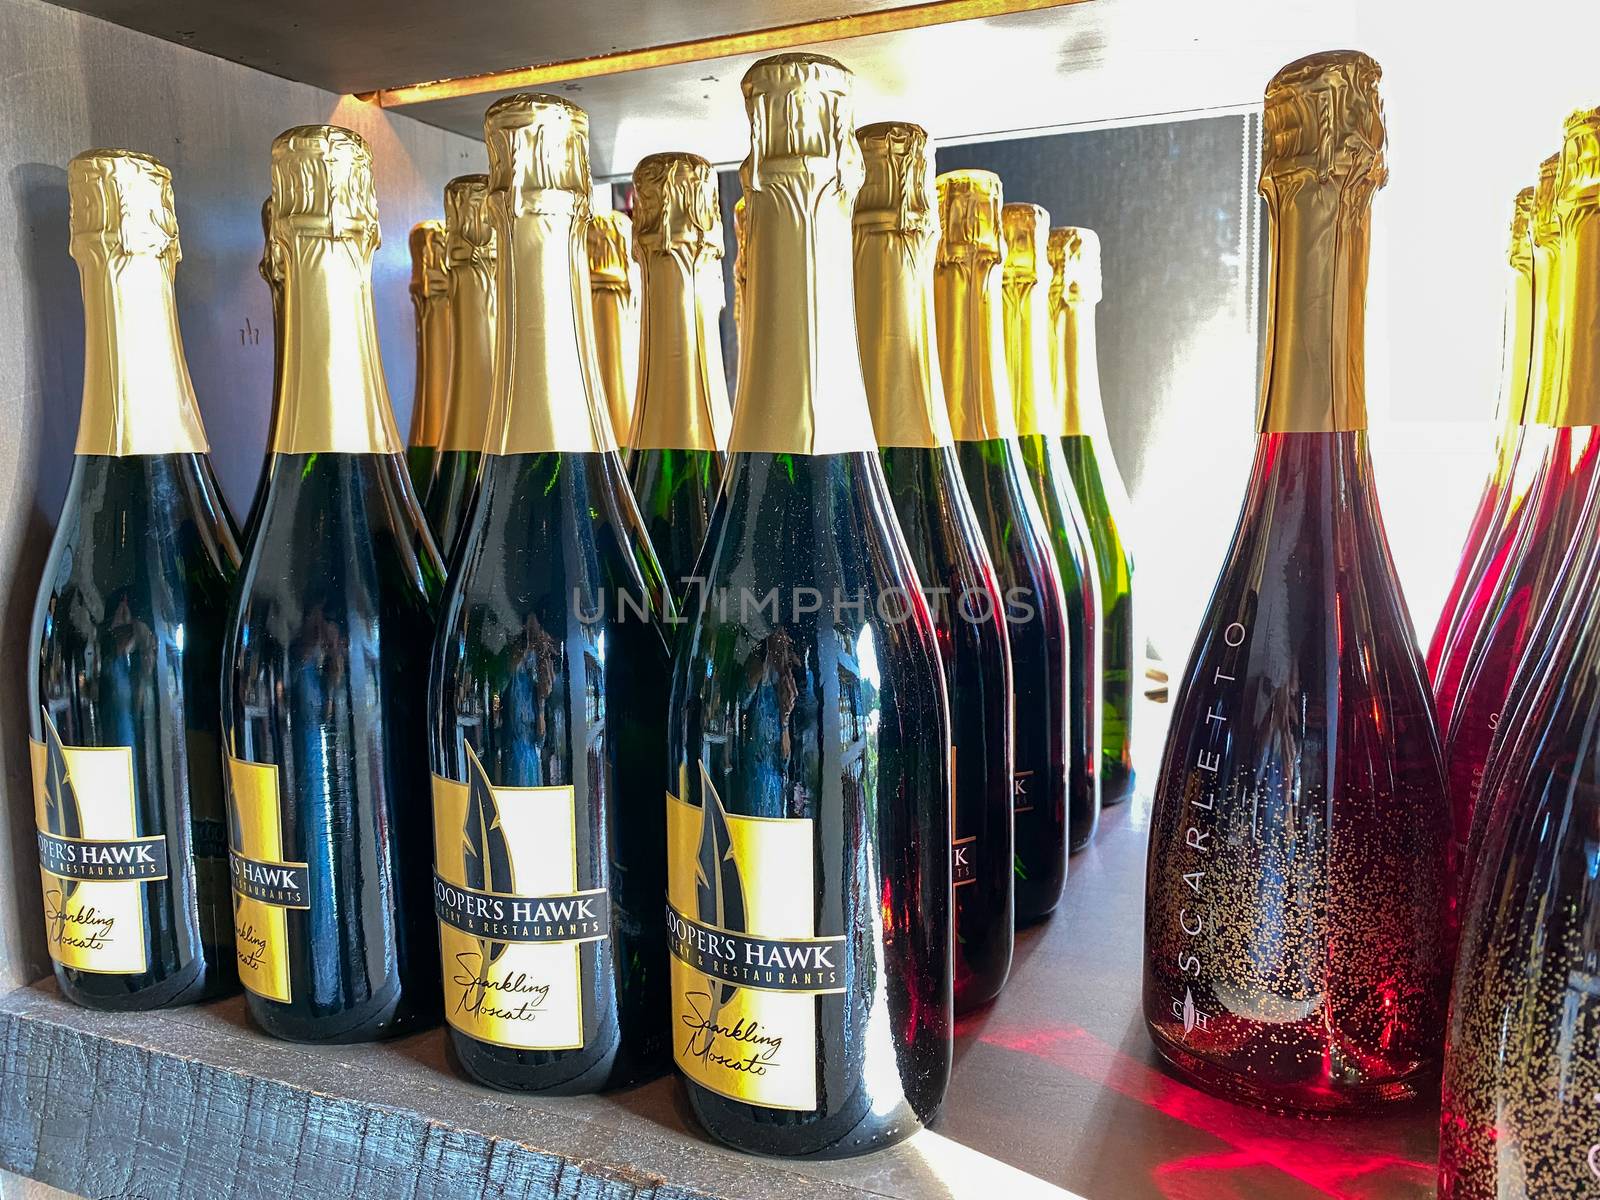 Naples, FL/USA - 10/30/20: Bottles of Sparkling Moscato wine at a Coopers Hawk Wine bar and restaurant in Naples, Florida.